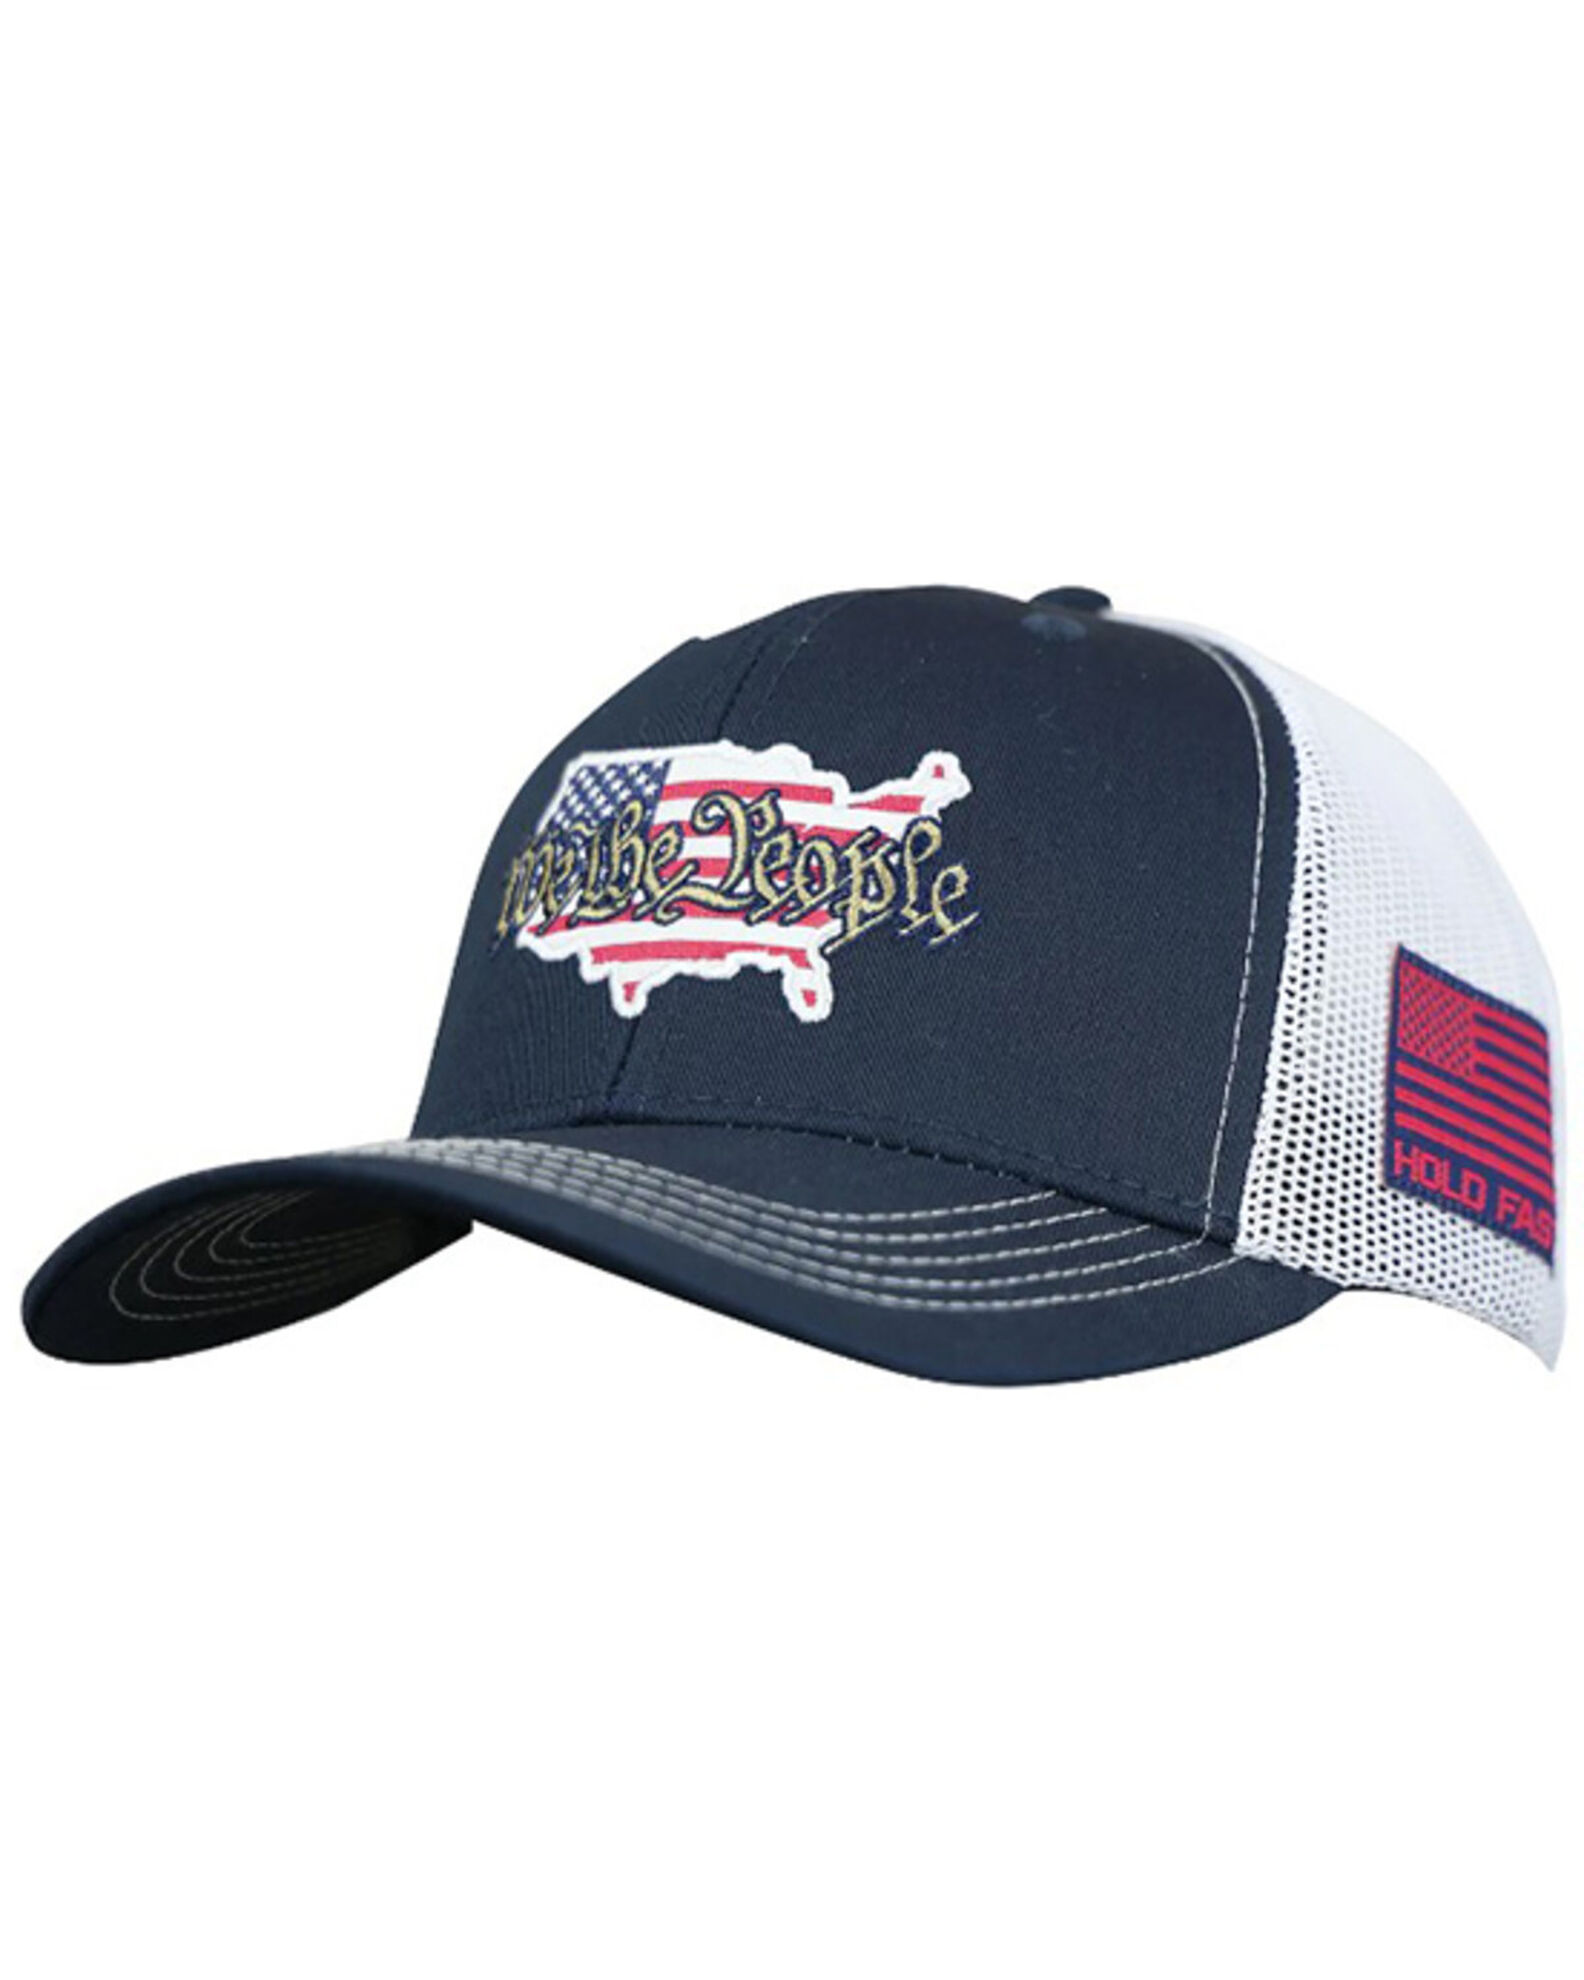 Hold Fast Men's We The People Baseball Cap